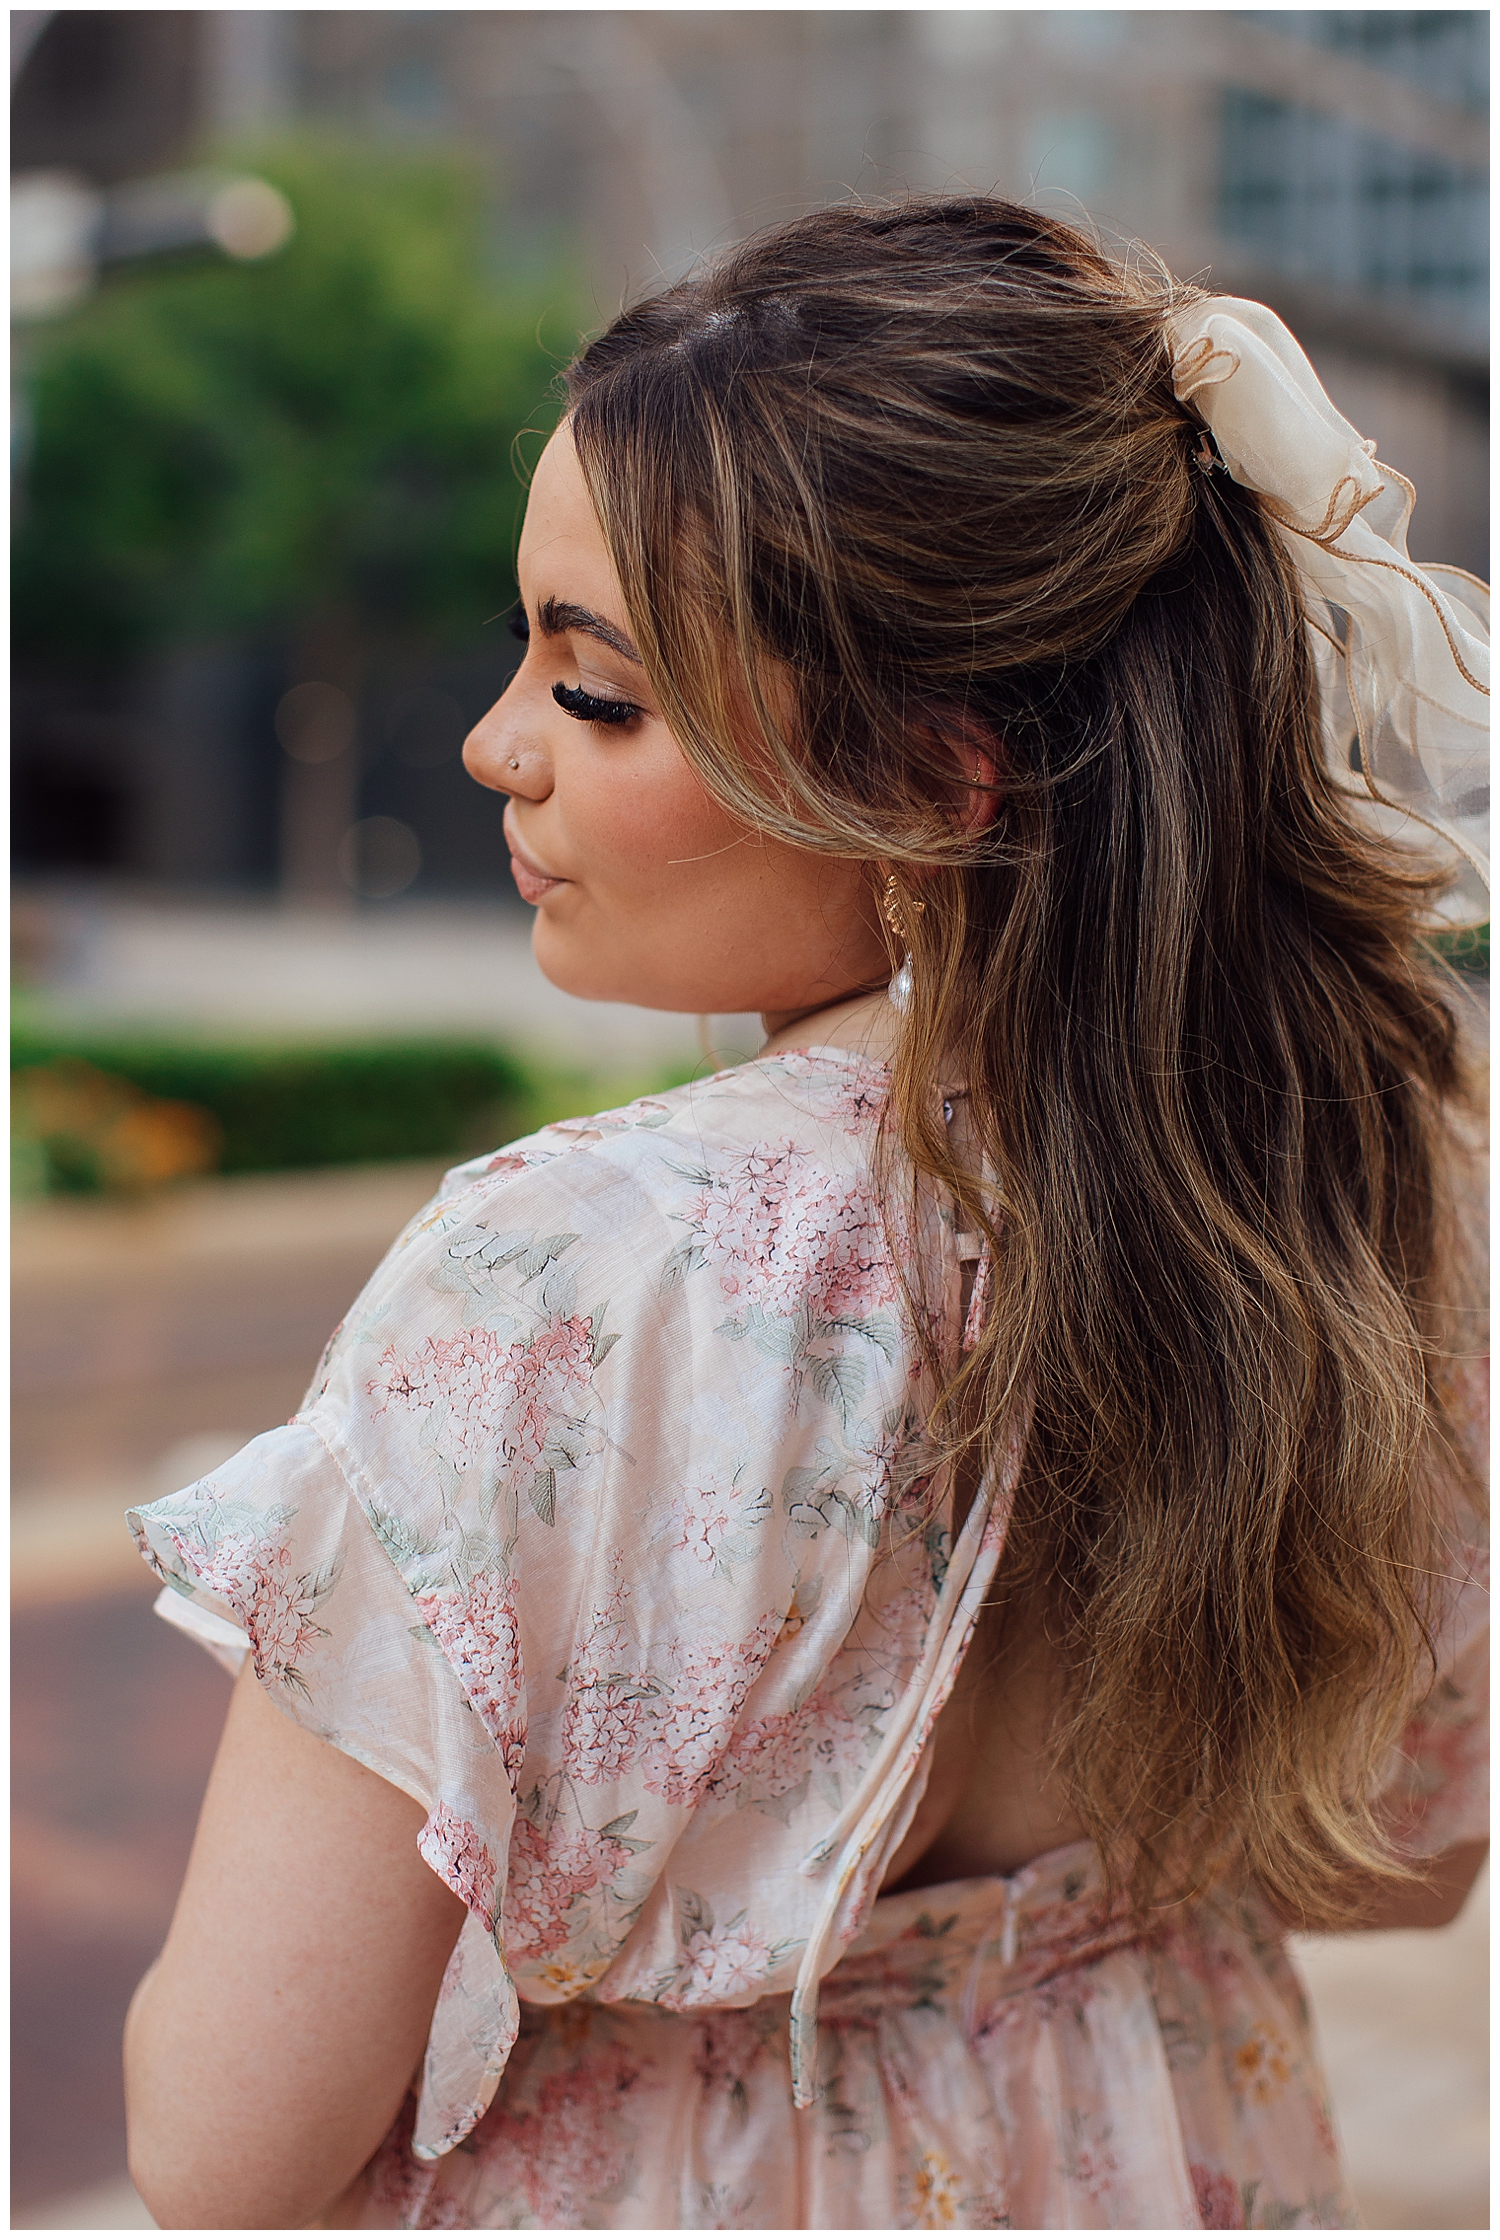 high school senior girl looking over shoulder wearing pink floral dress with bow in hair